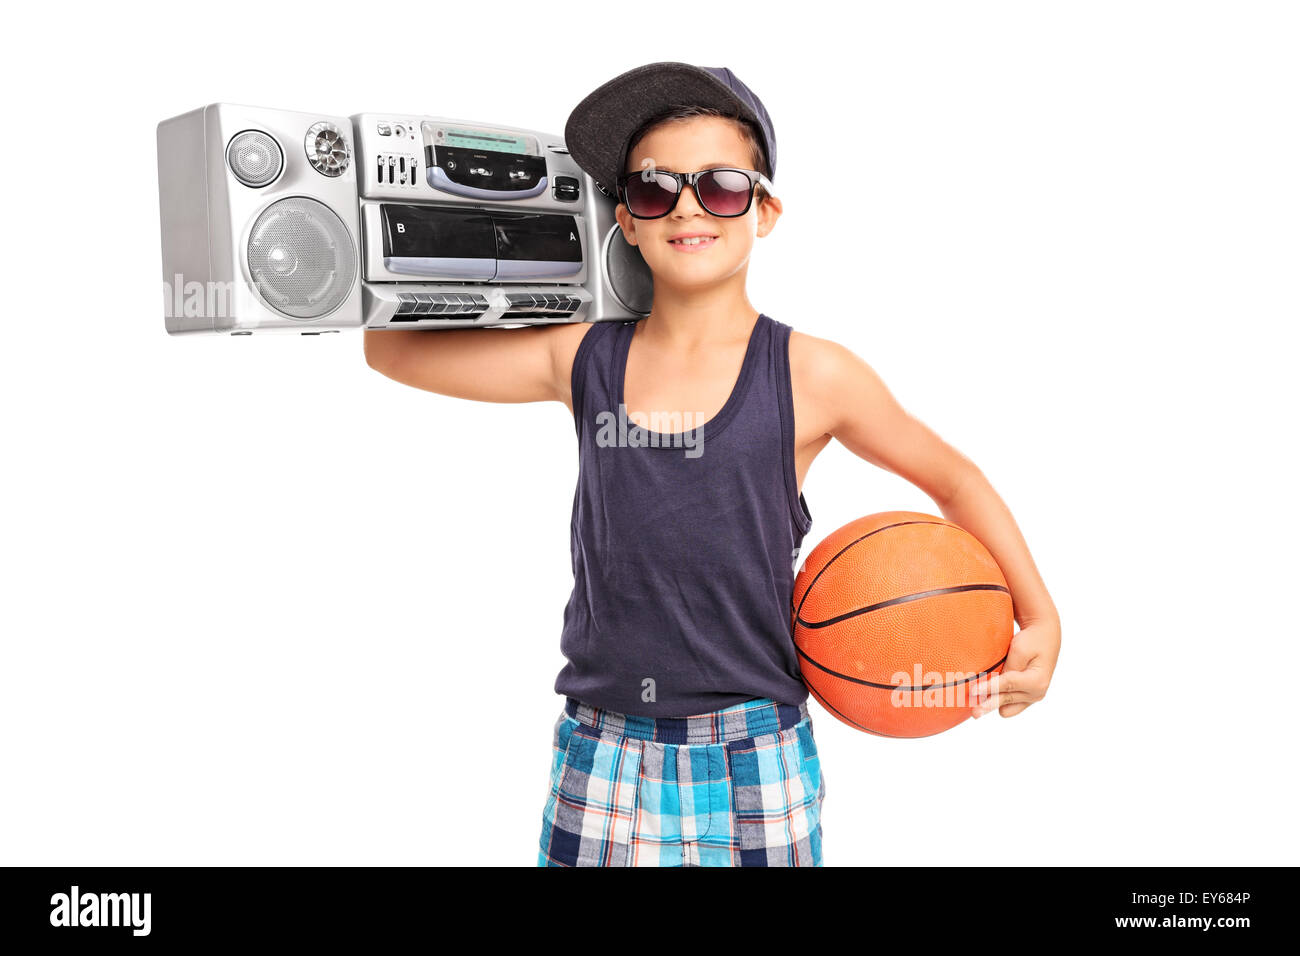 Studio shot of a little boy holding a basketball and a ghetto blaster isolated on white background Stock Photo